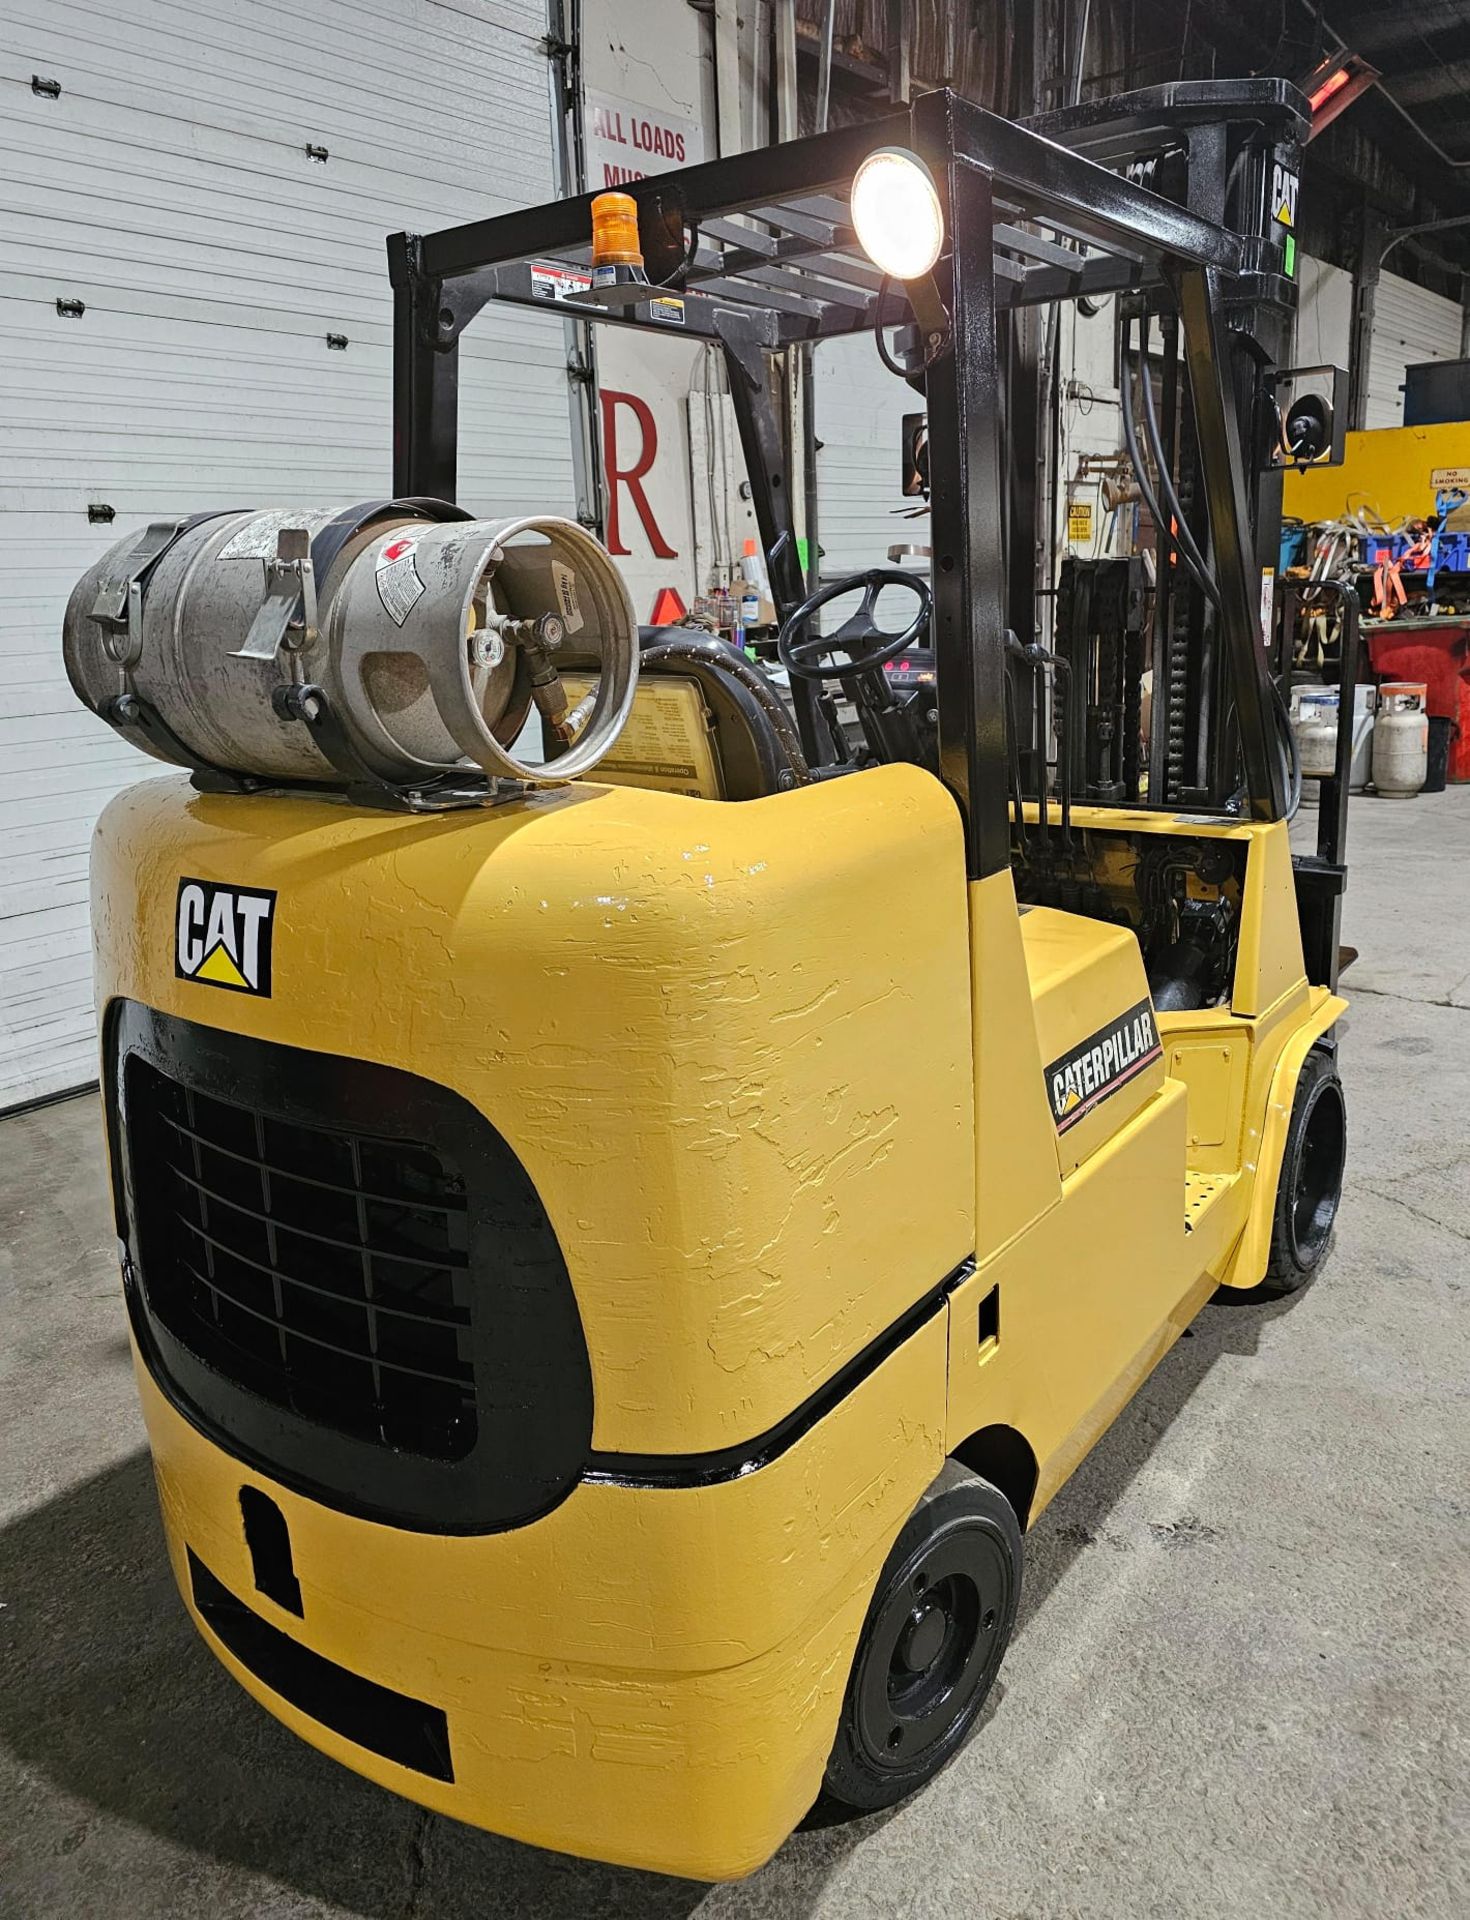 CAT 9,000lbs Capacity LPG (Propane) Forklift with sideshift & 3-STAGE MAST 209" load height (no tank - Image 2 of 5